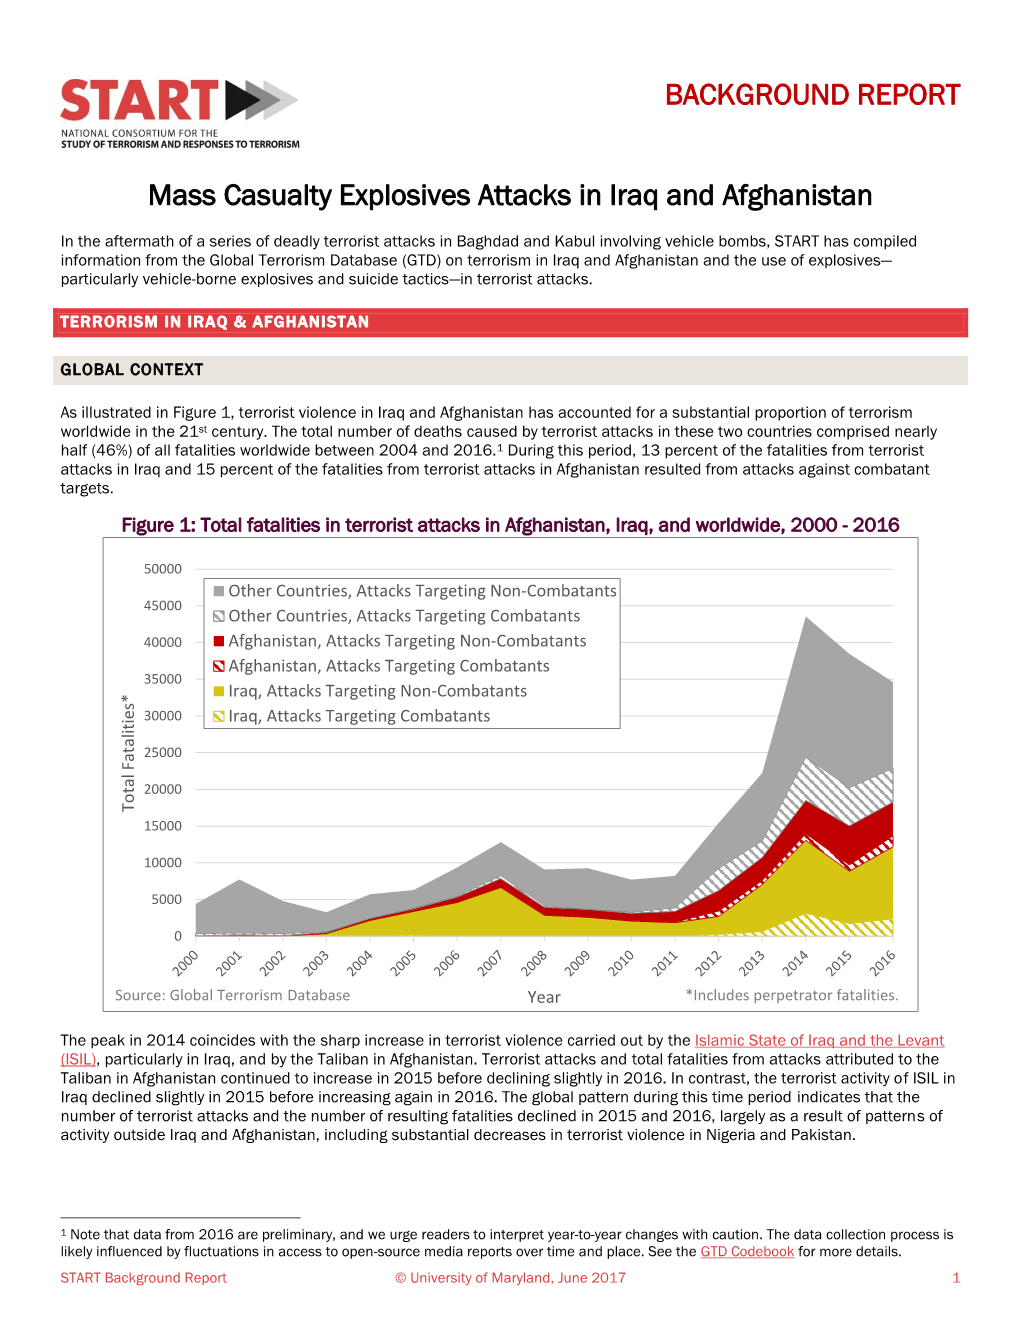 Mass Casualty Explosives Attacks in Iraq and Afghanistan